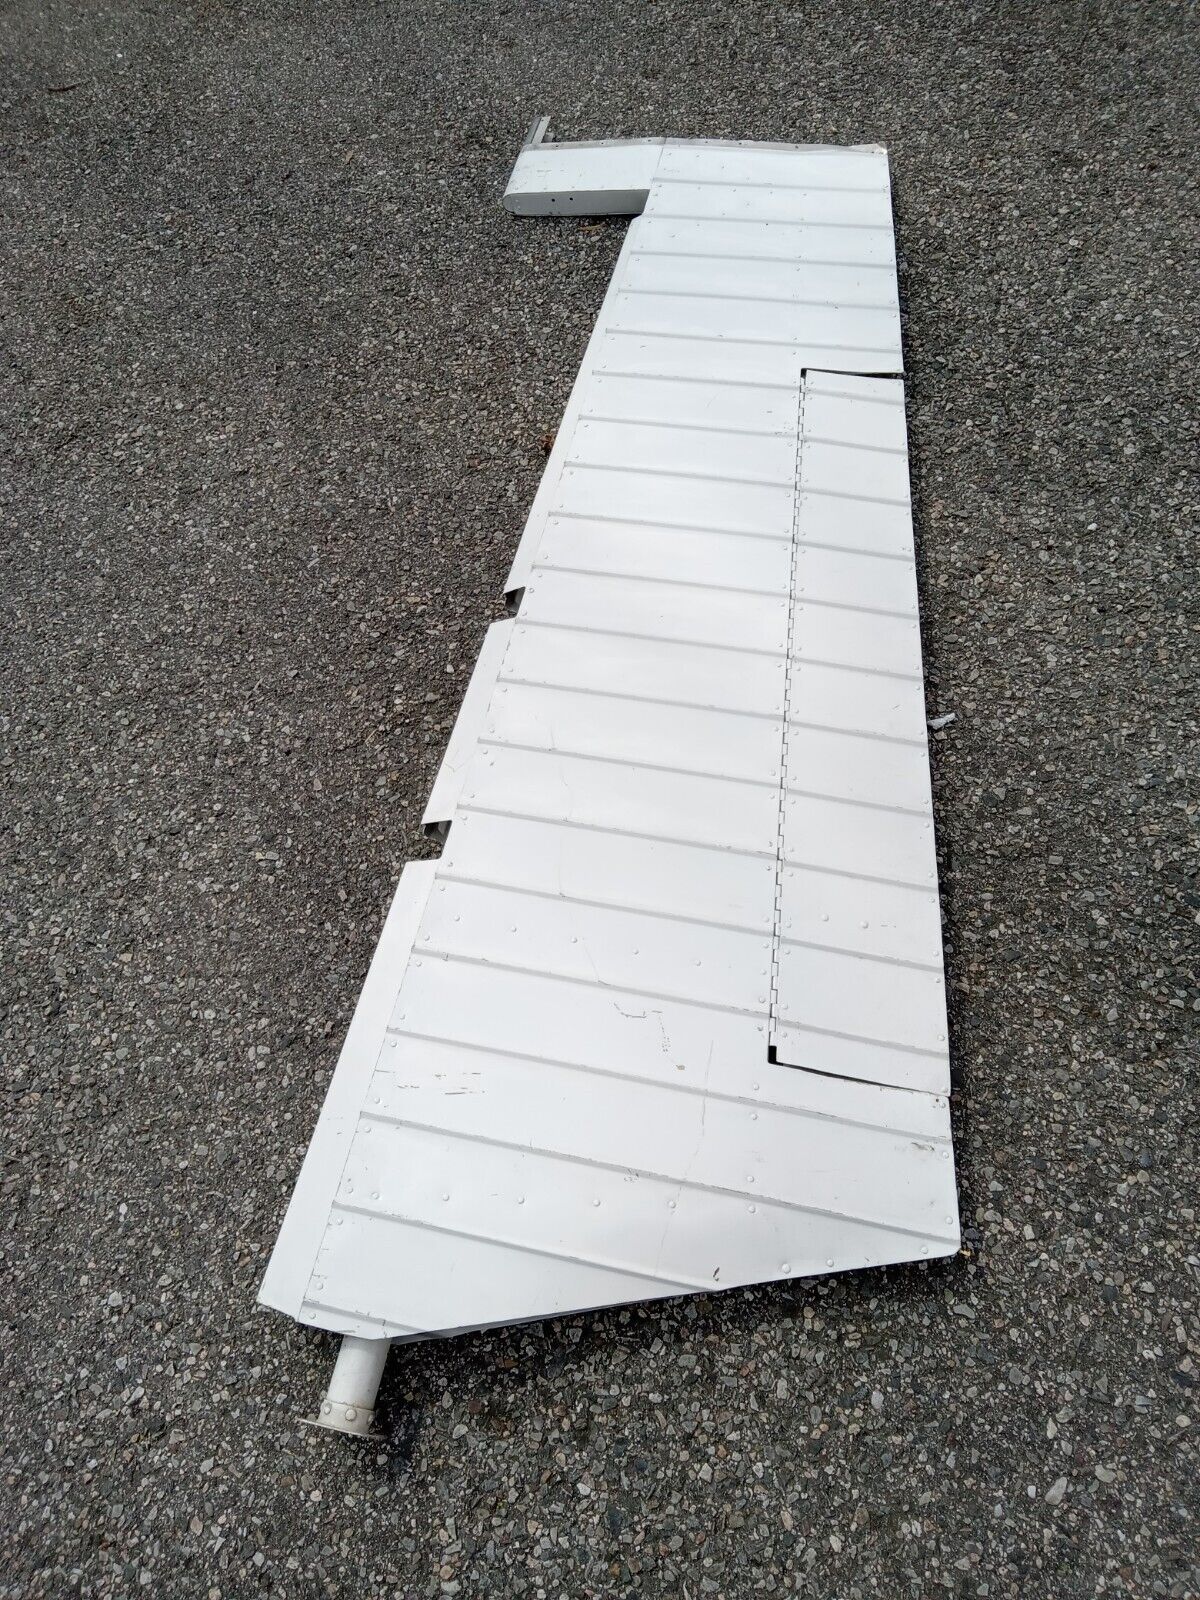 Cessna 172  -  182  ???? Elevator  rudder ,  used , unknown condition   AS IS